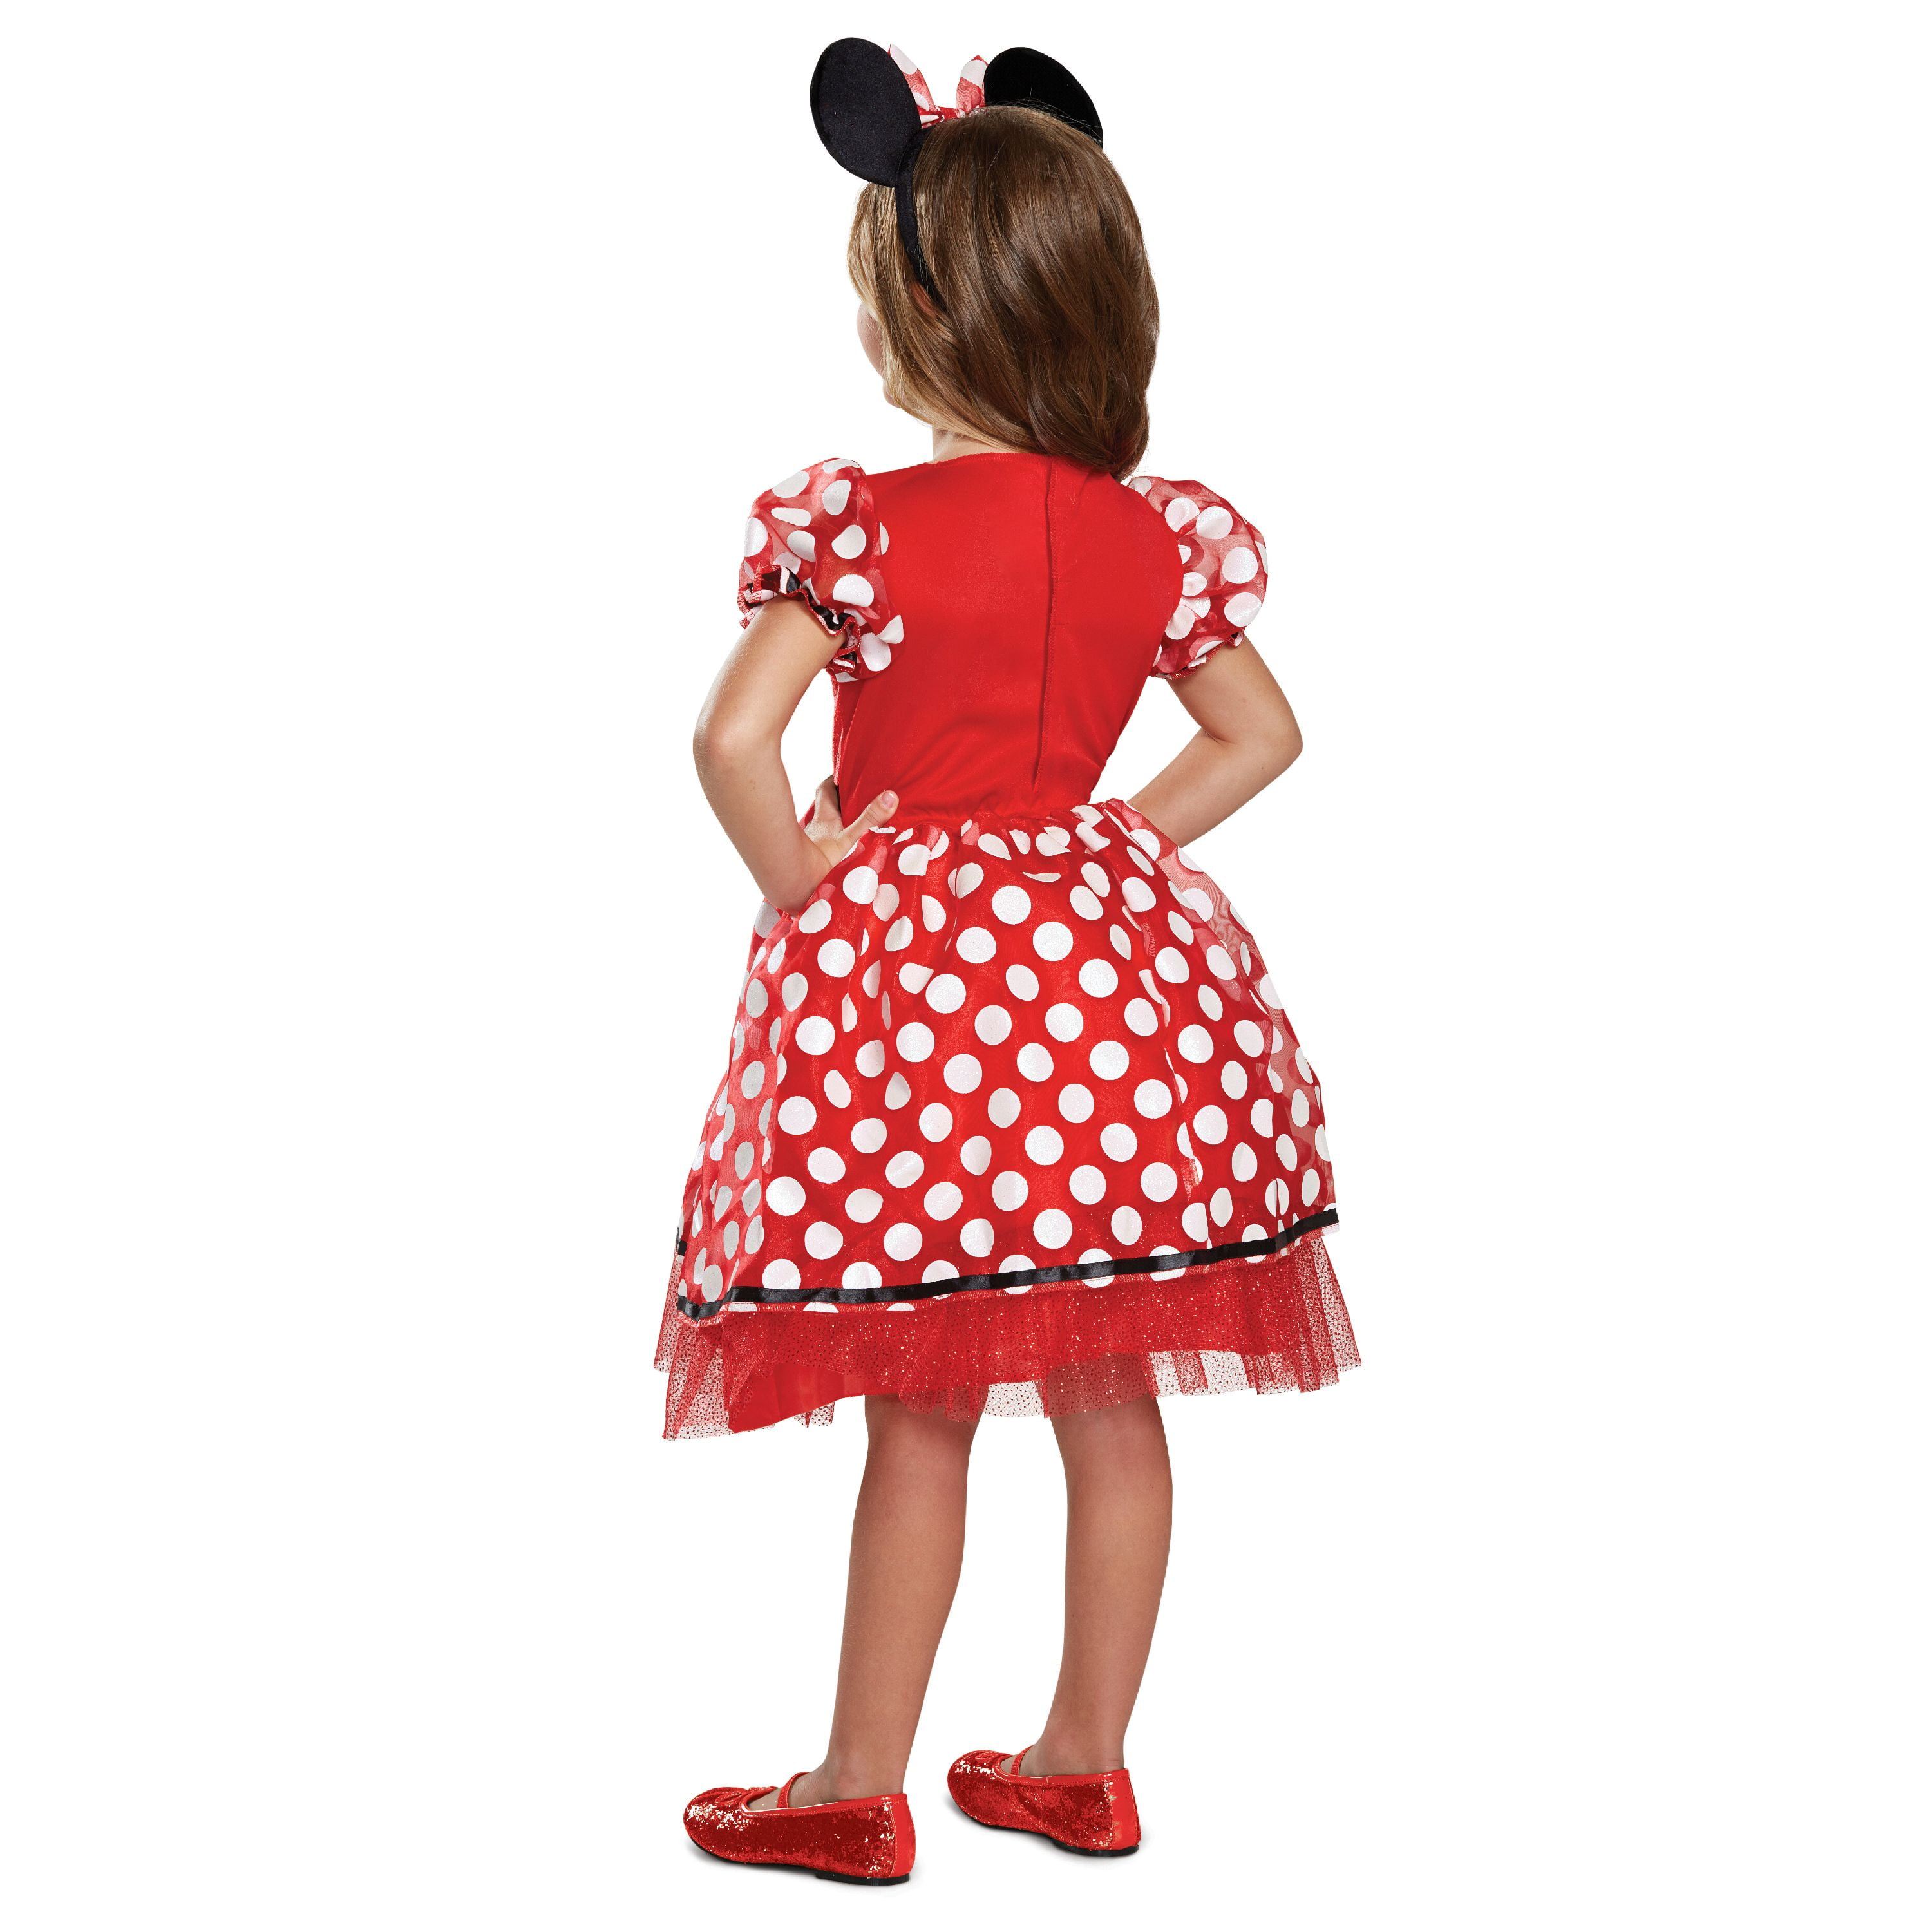 Disguise Minnie Mouse Classic Girl's Halloween Fancy-Dress Costume for Child, S (8-10) - Walmart.com